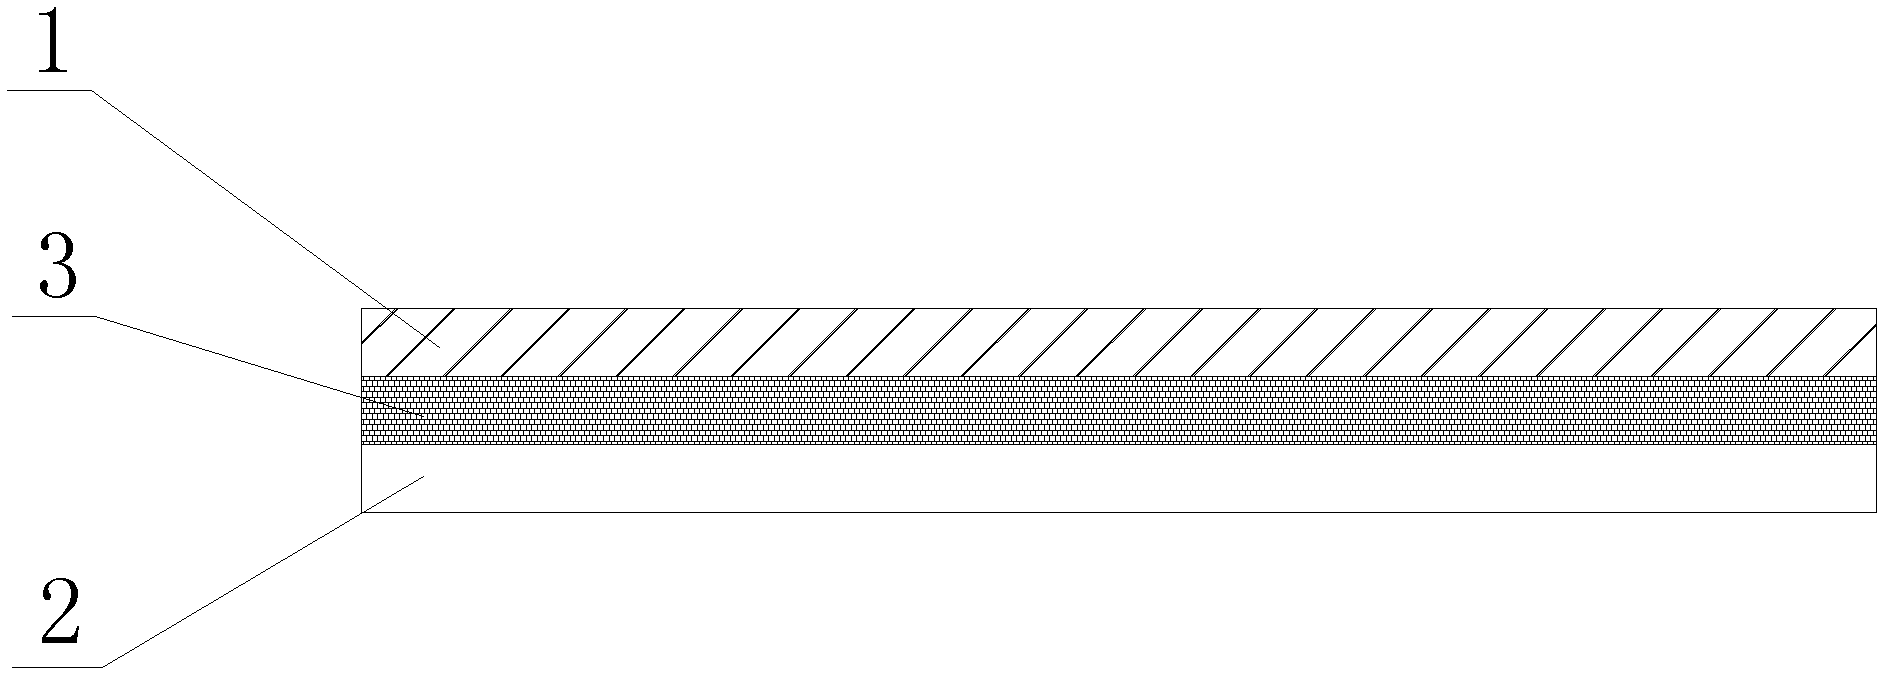 Reflecting film structure of transition layer